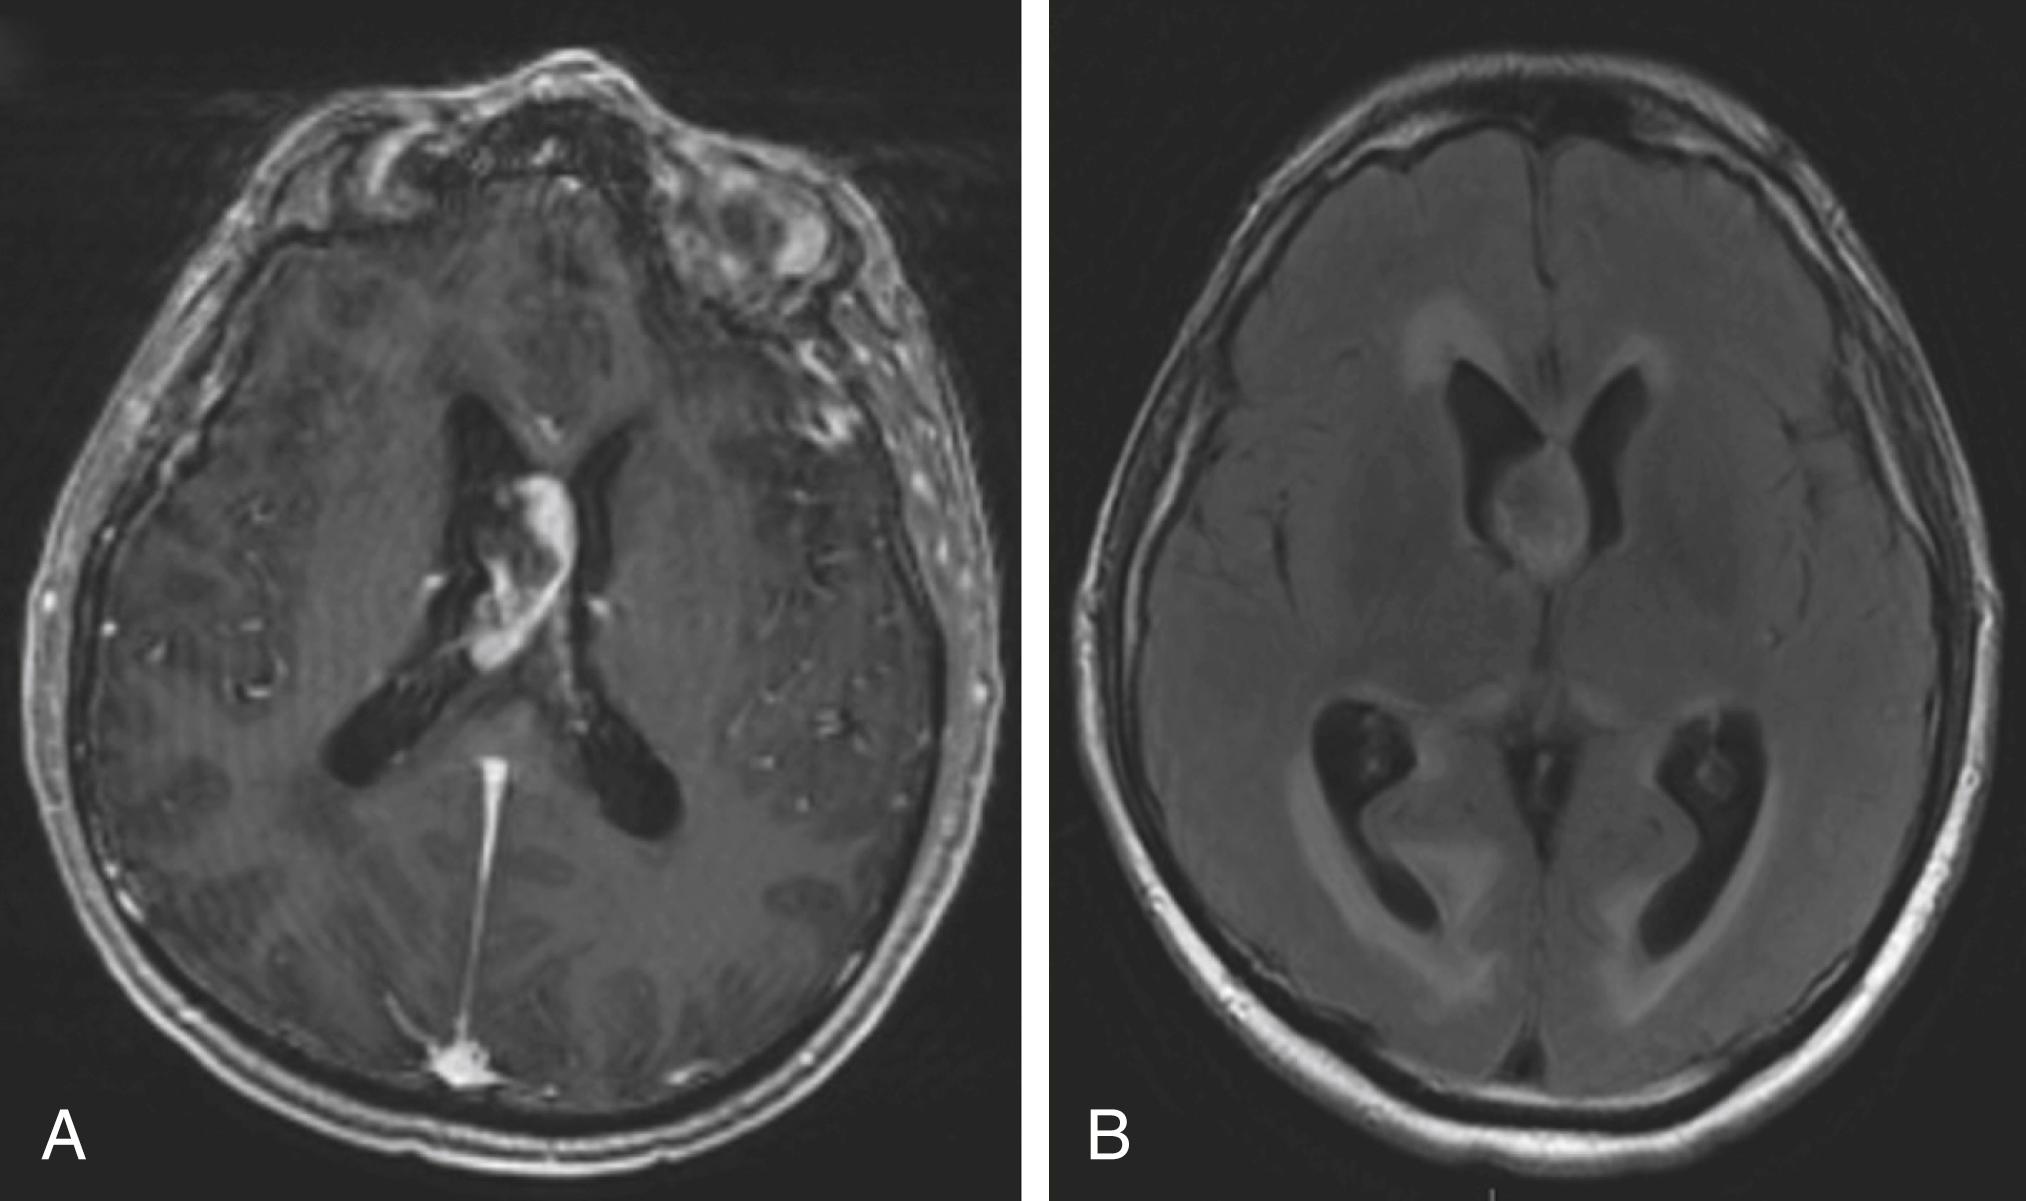 Fig. 19.1, MRI of the patient in Case 19.1 . (A) Axial fluid-attenuated inversion recover image showing dilation of the lateral ventricles with obstructive hydrocephalus and trans-ependymal flow of cerebrospinal fluid. (B) Axial post-contrast T1-weighted image reveals a contrast - enhancing mass of the septum pellucidum.